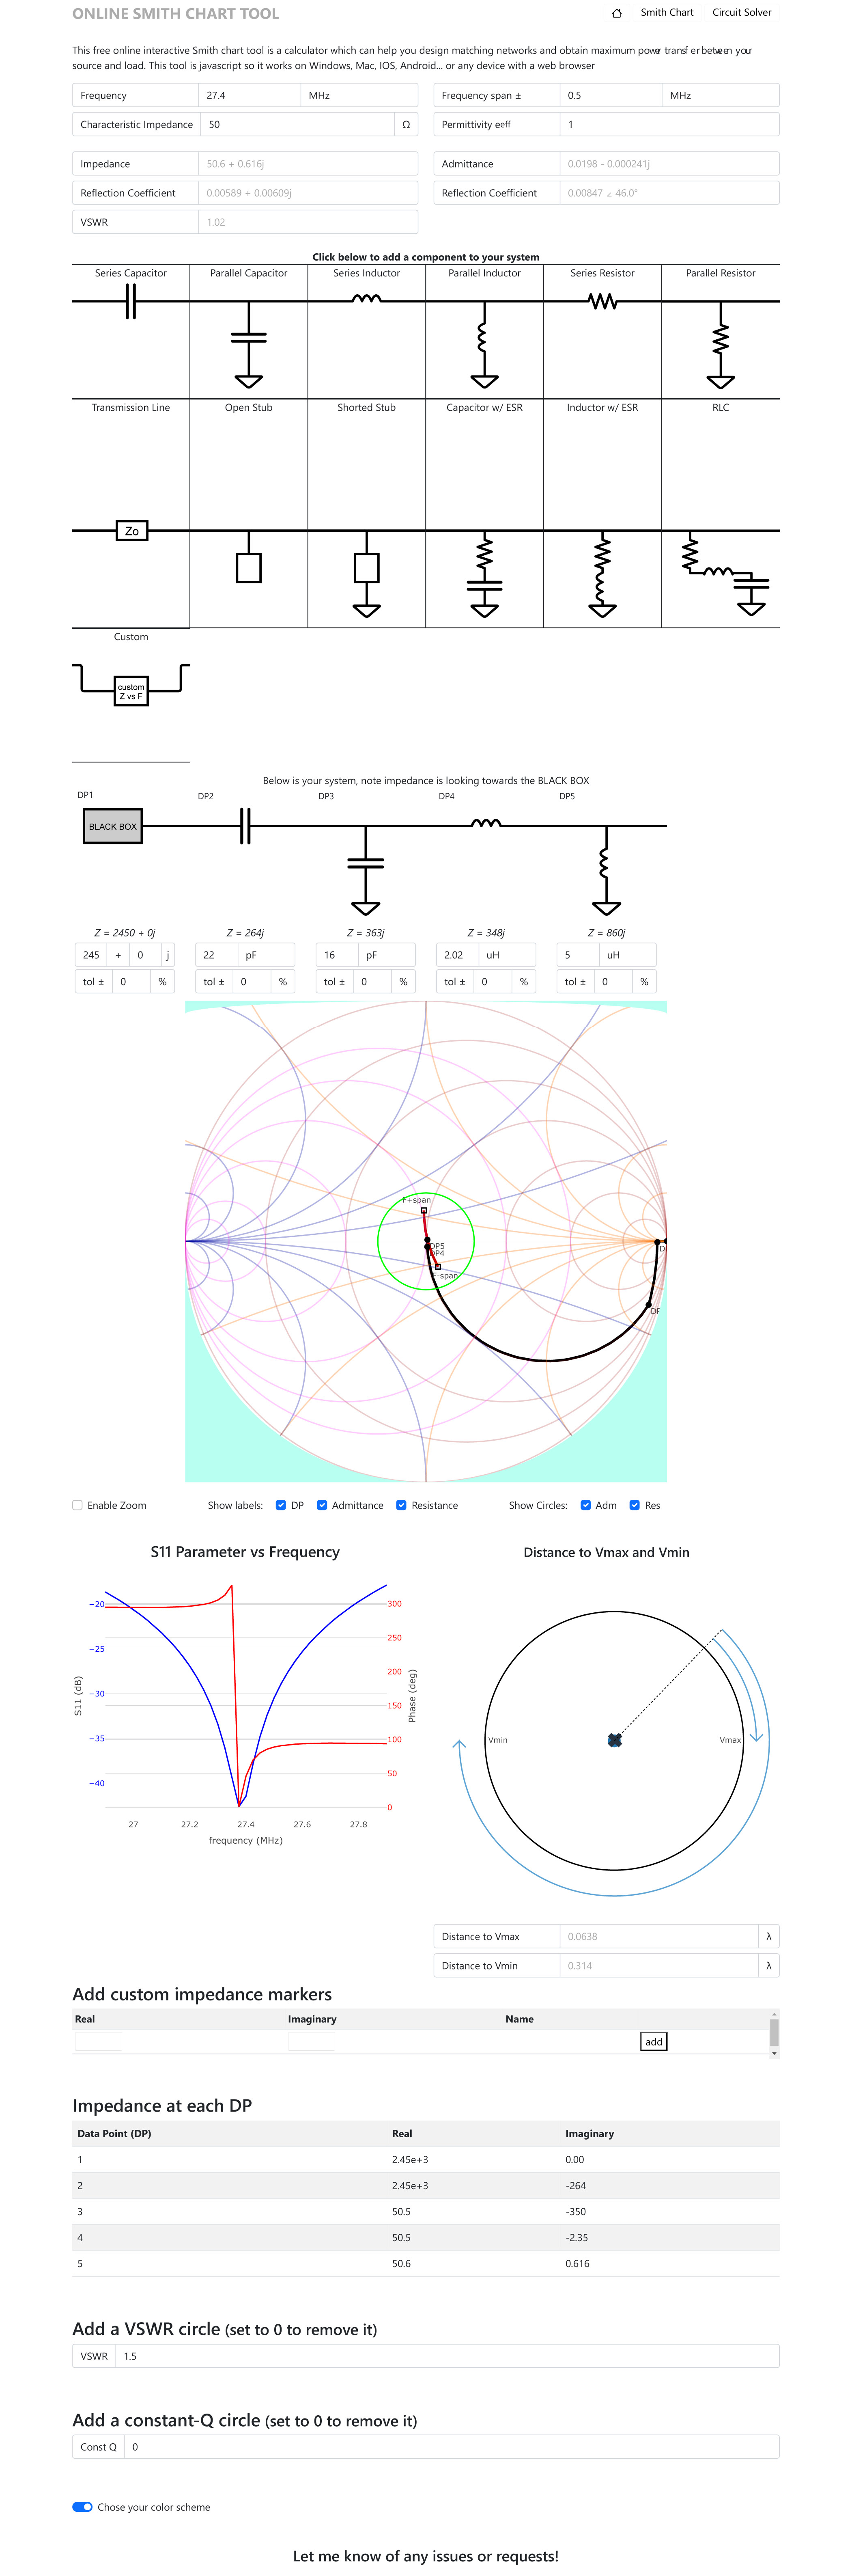 A99 Online Smith Chart Tool5 copy.jpg